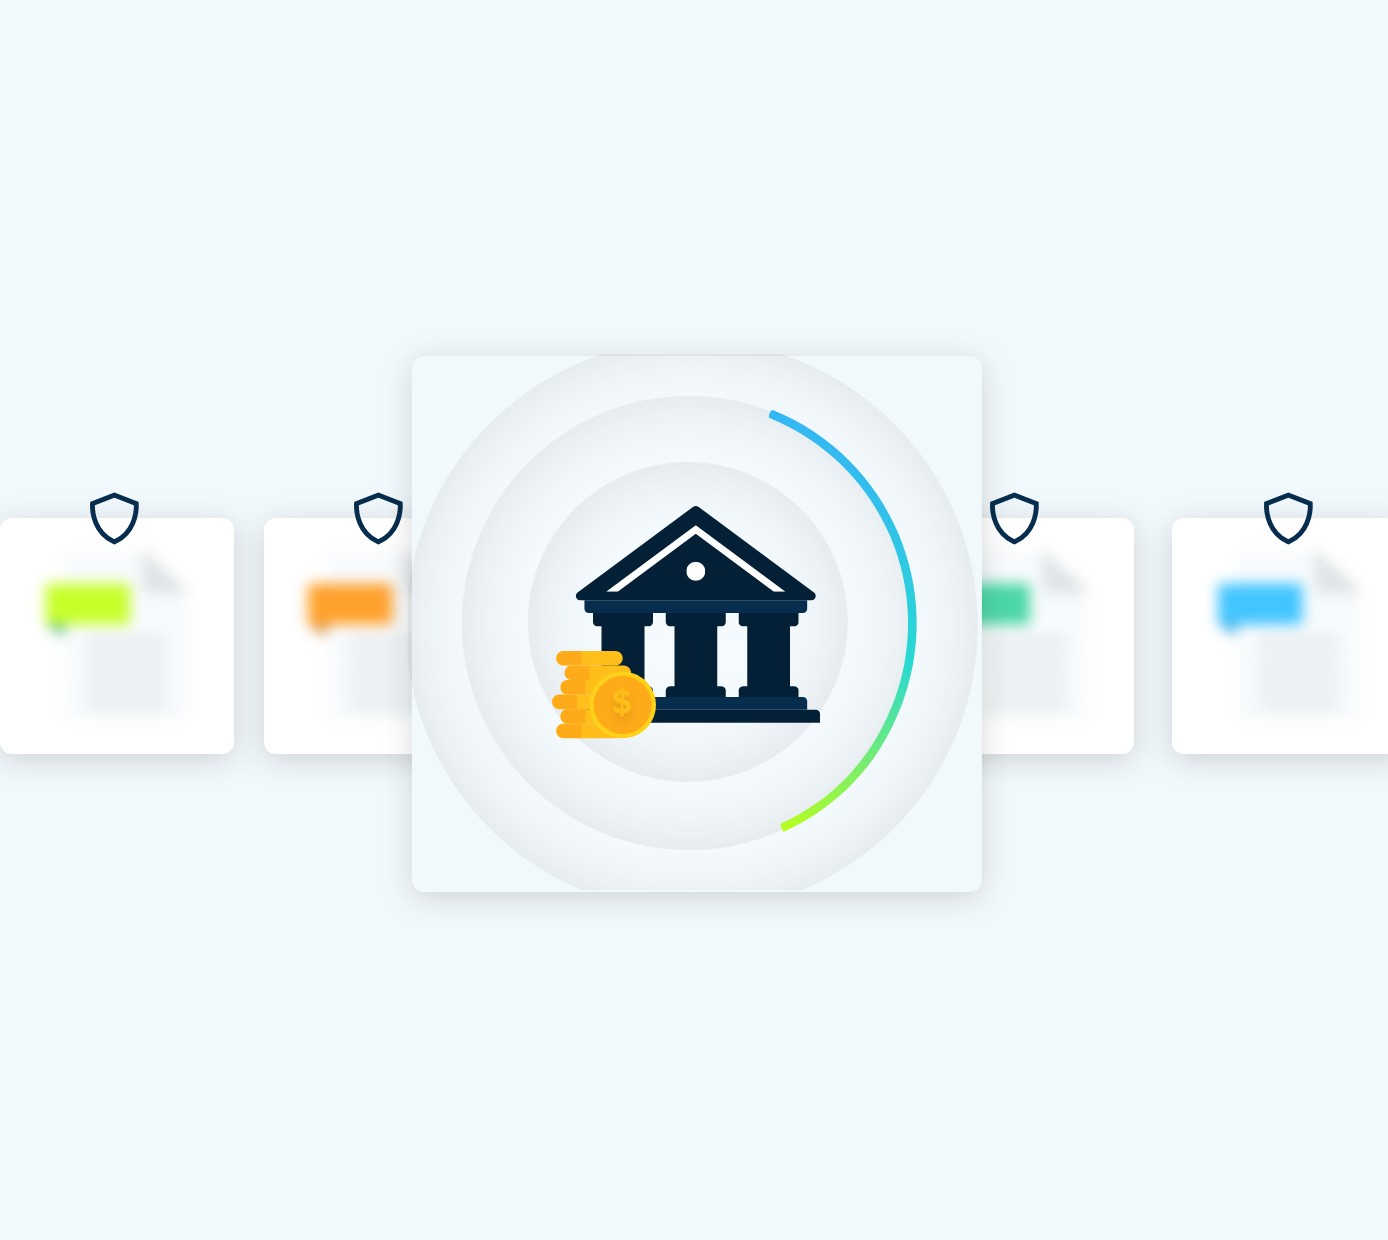 Bank and money icons selected in a menu